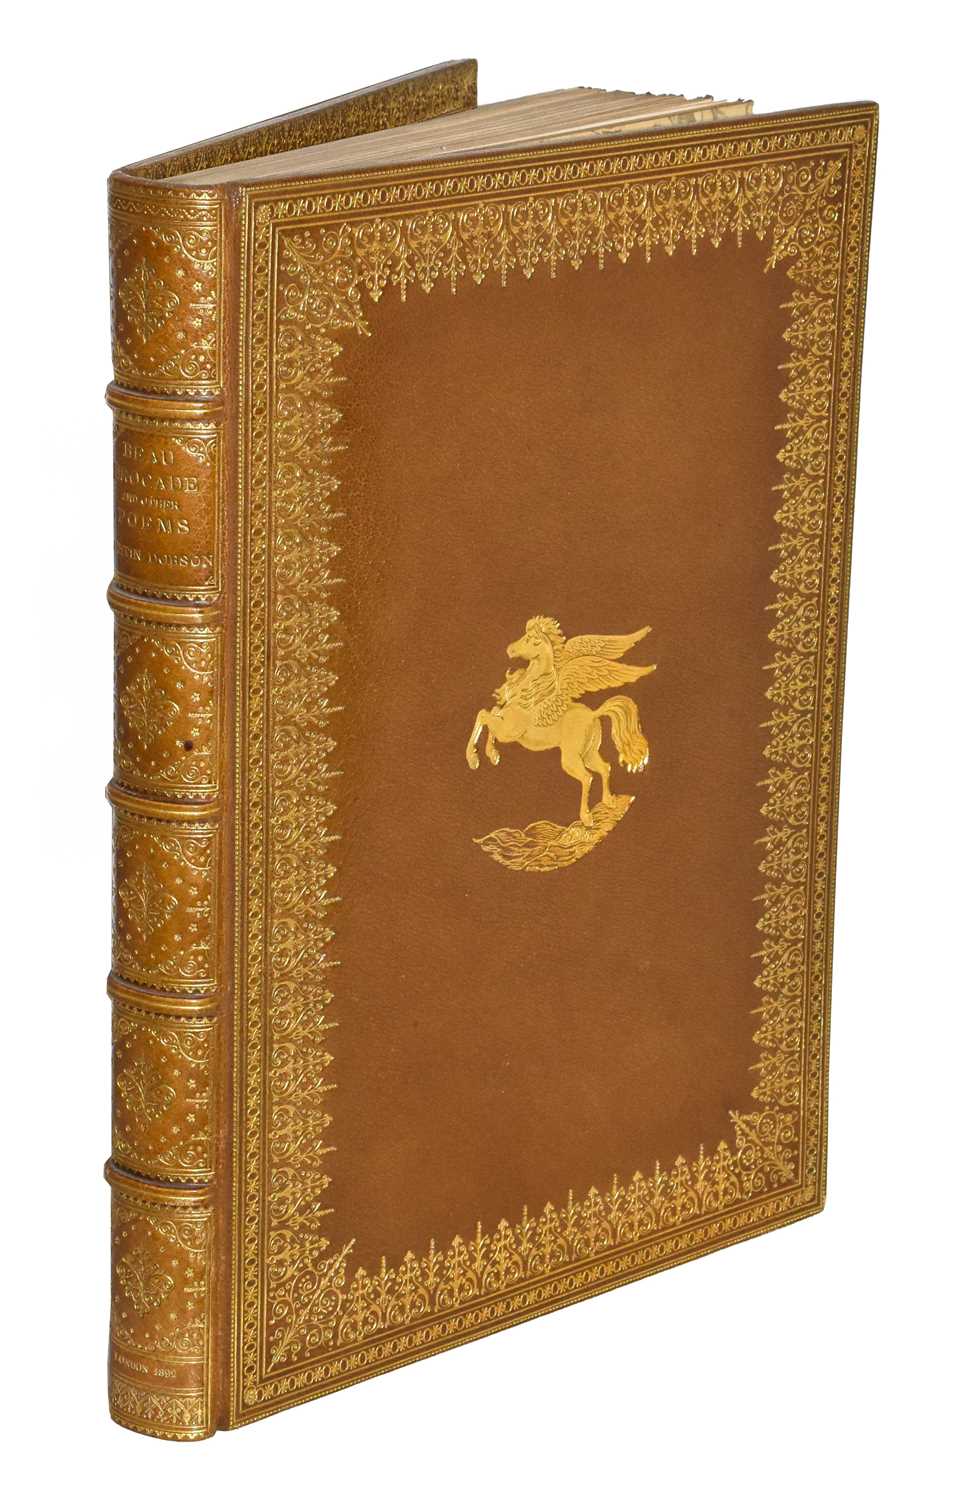 Thomson (Hugh, illustrator). The Ballad of Beau Brocade and Other Poems of the XVIII Century, by